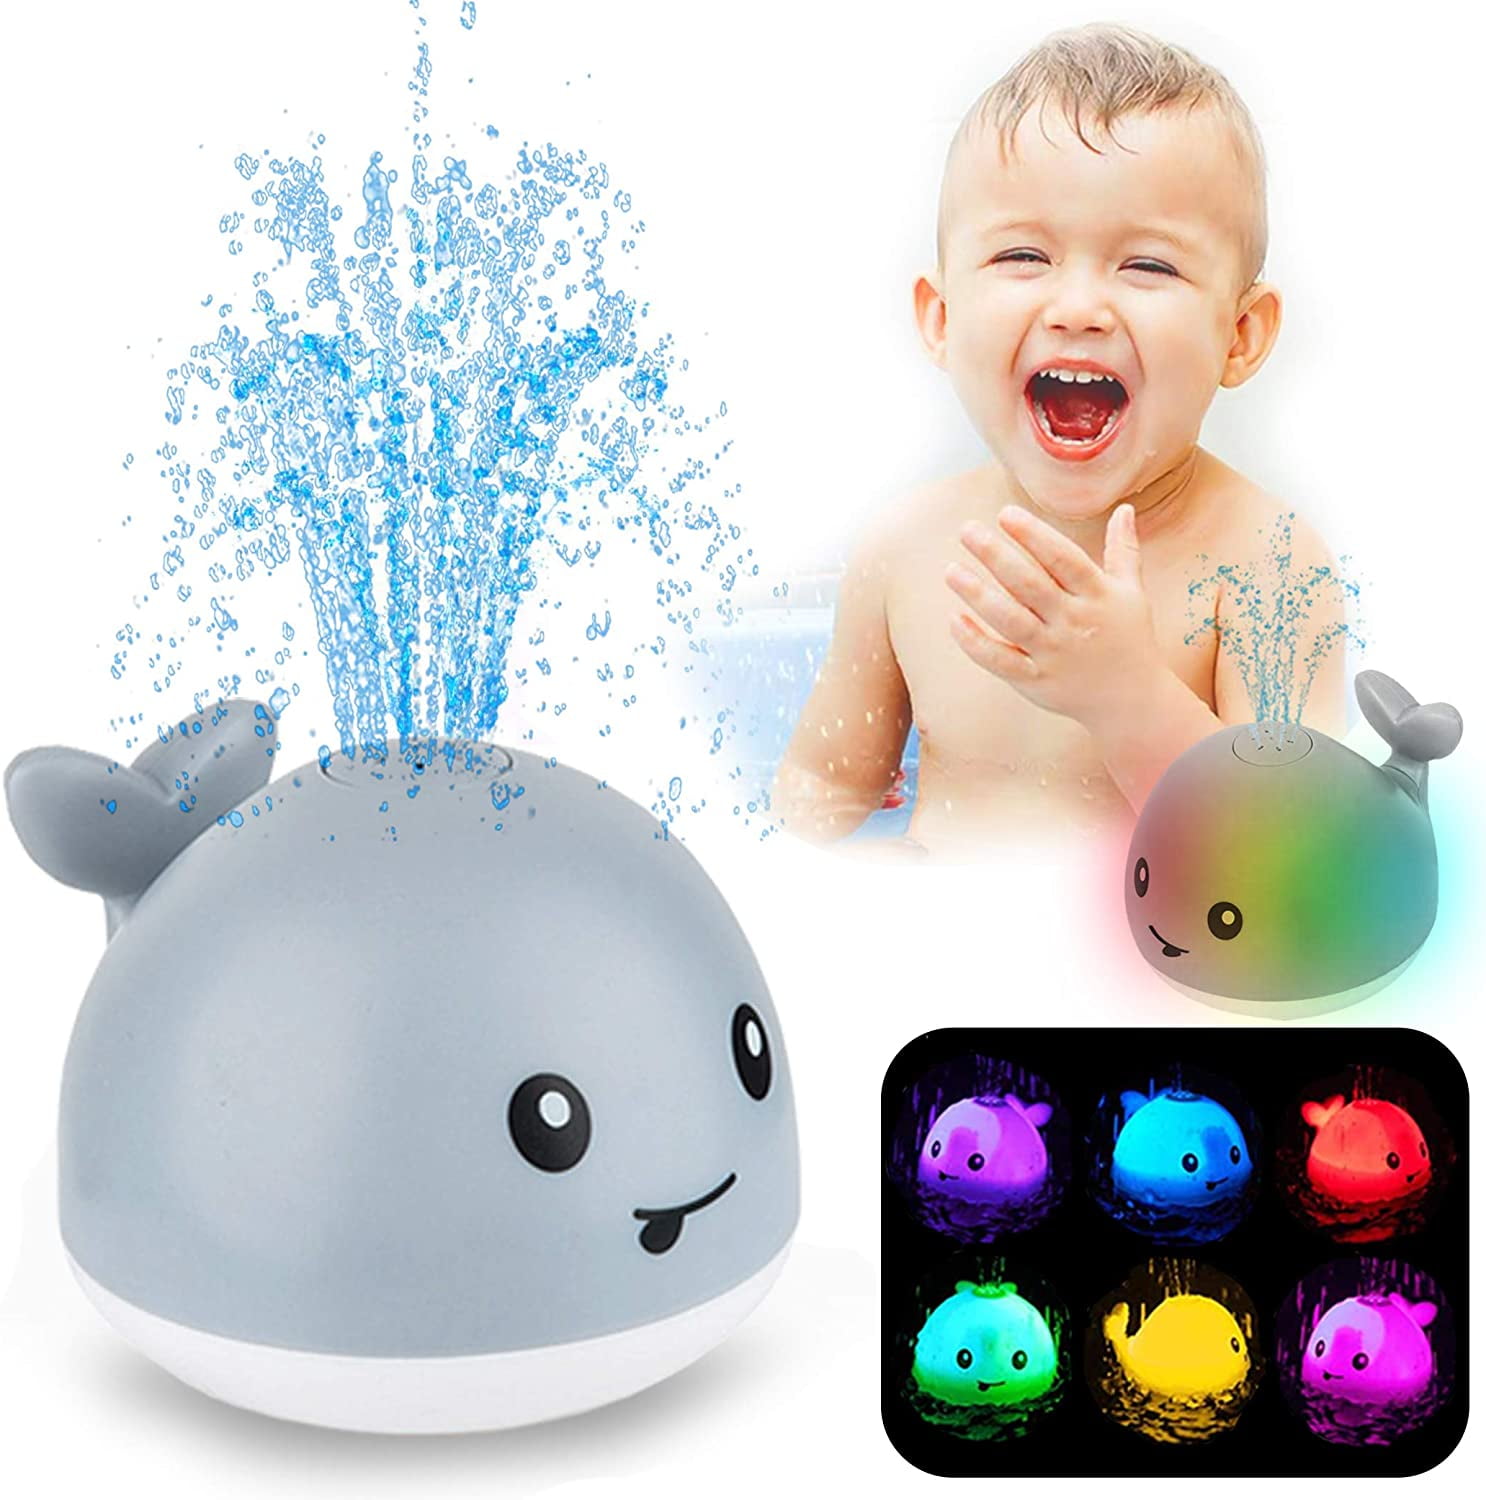 Addmos Baby Bath Toys for Boys Girls Kids Toddlers Bathtime Toys Birthday Gifts White 2 x Whale Water Spray Baby Bathtub Toys with Lights One Pair 